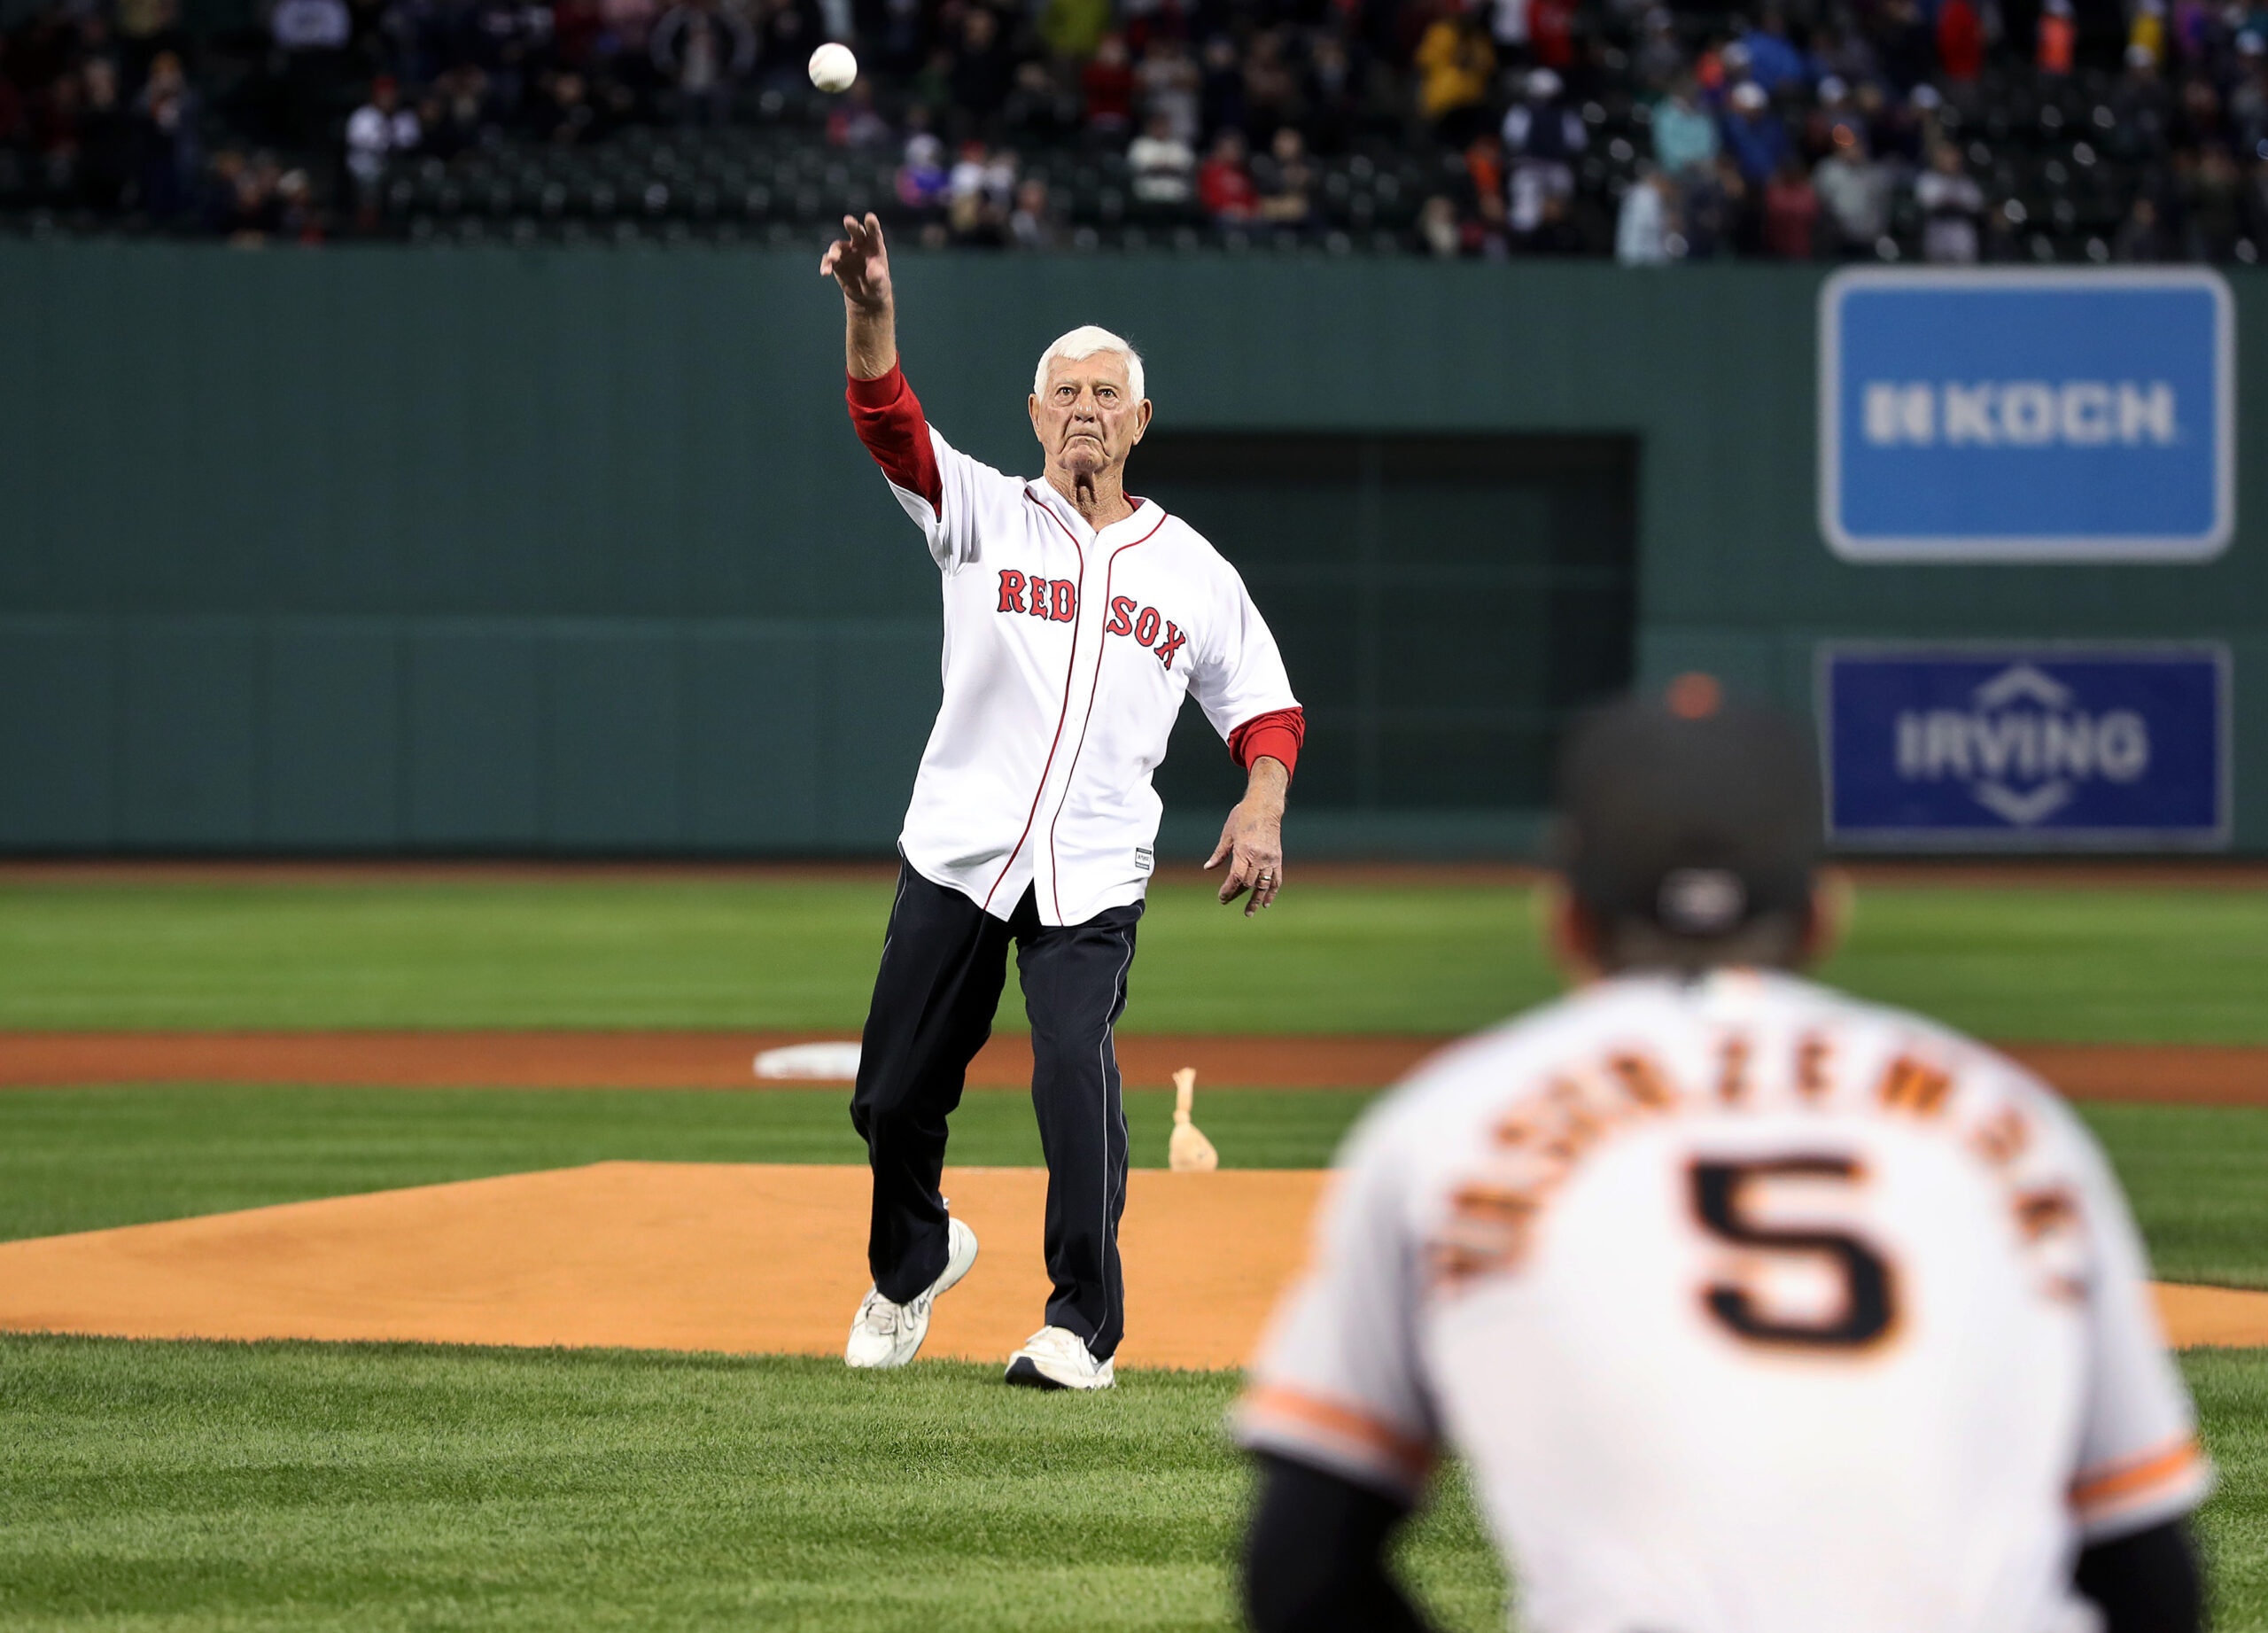 Carl Yastrzemski Delivers First Pitch Before Red Sox